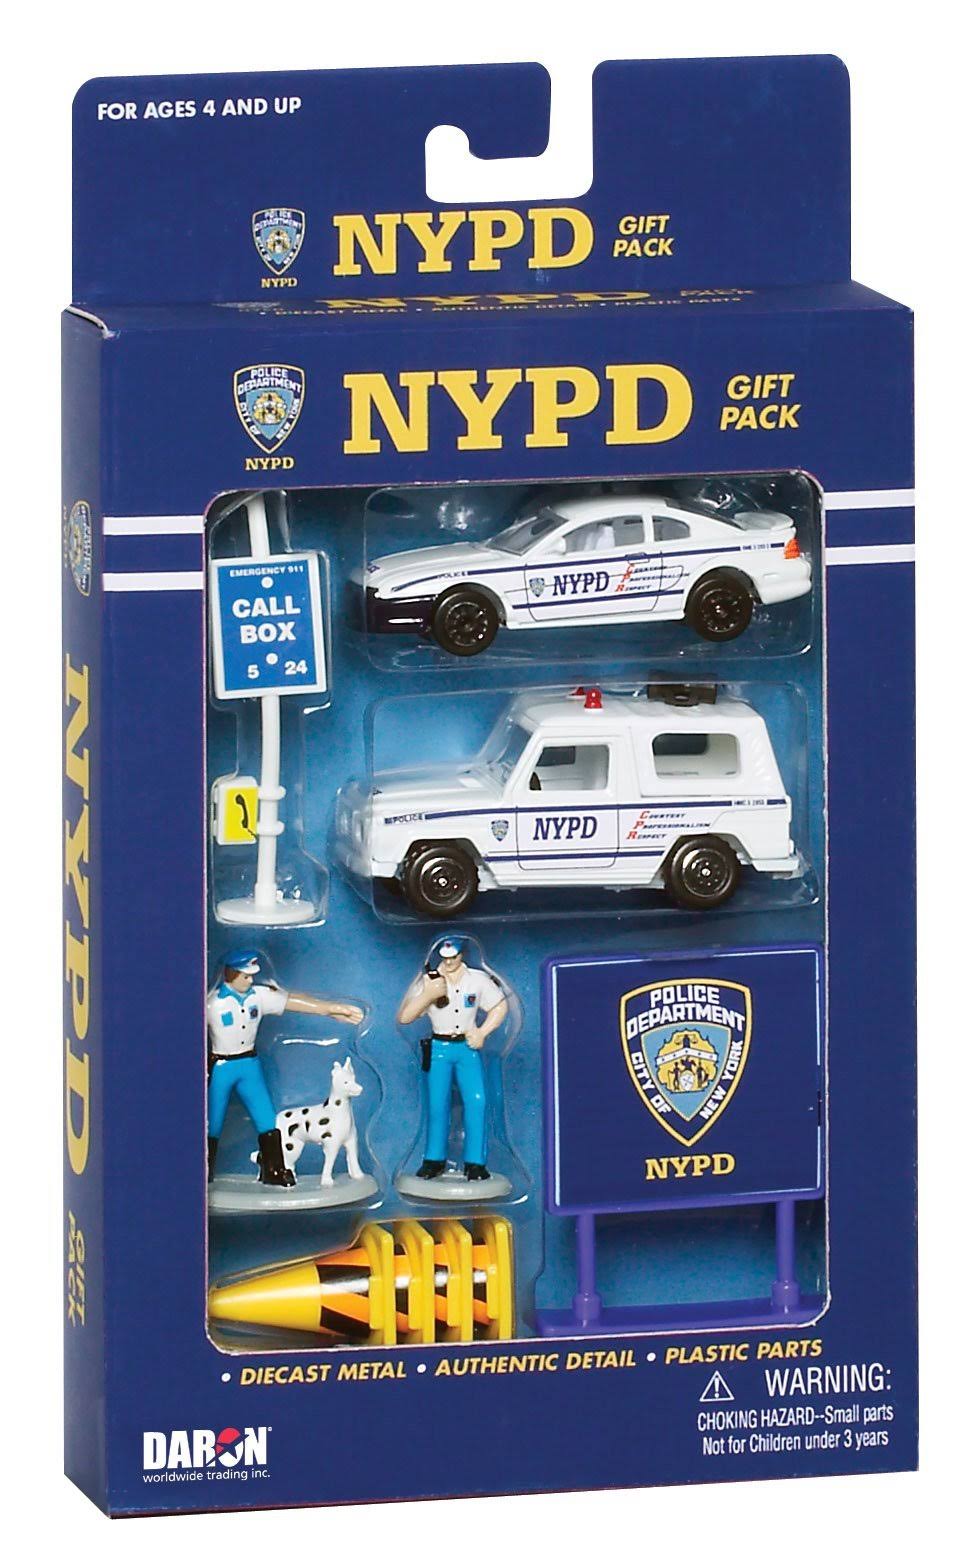 Daron Worldwide Trading Nypd Gift Pack